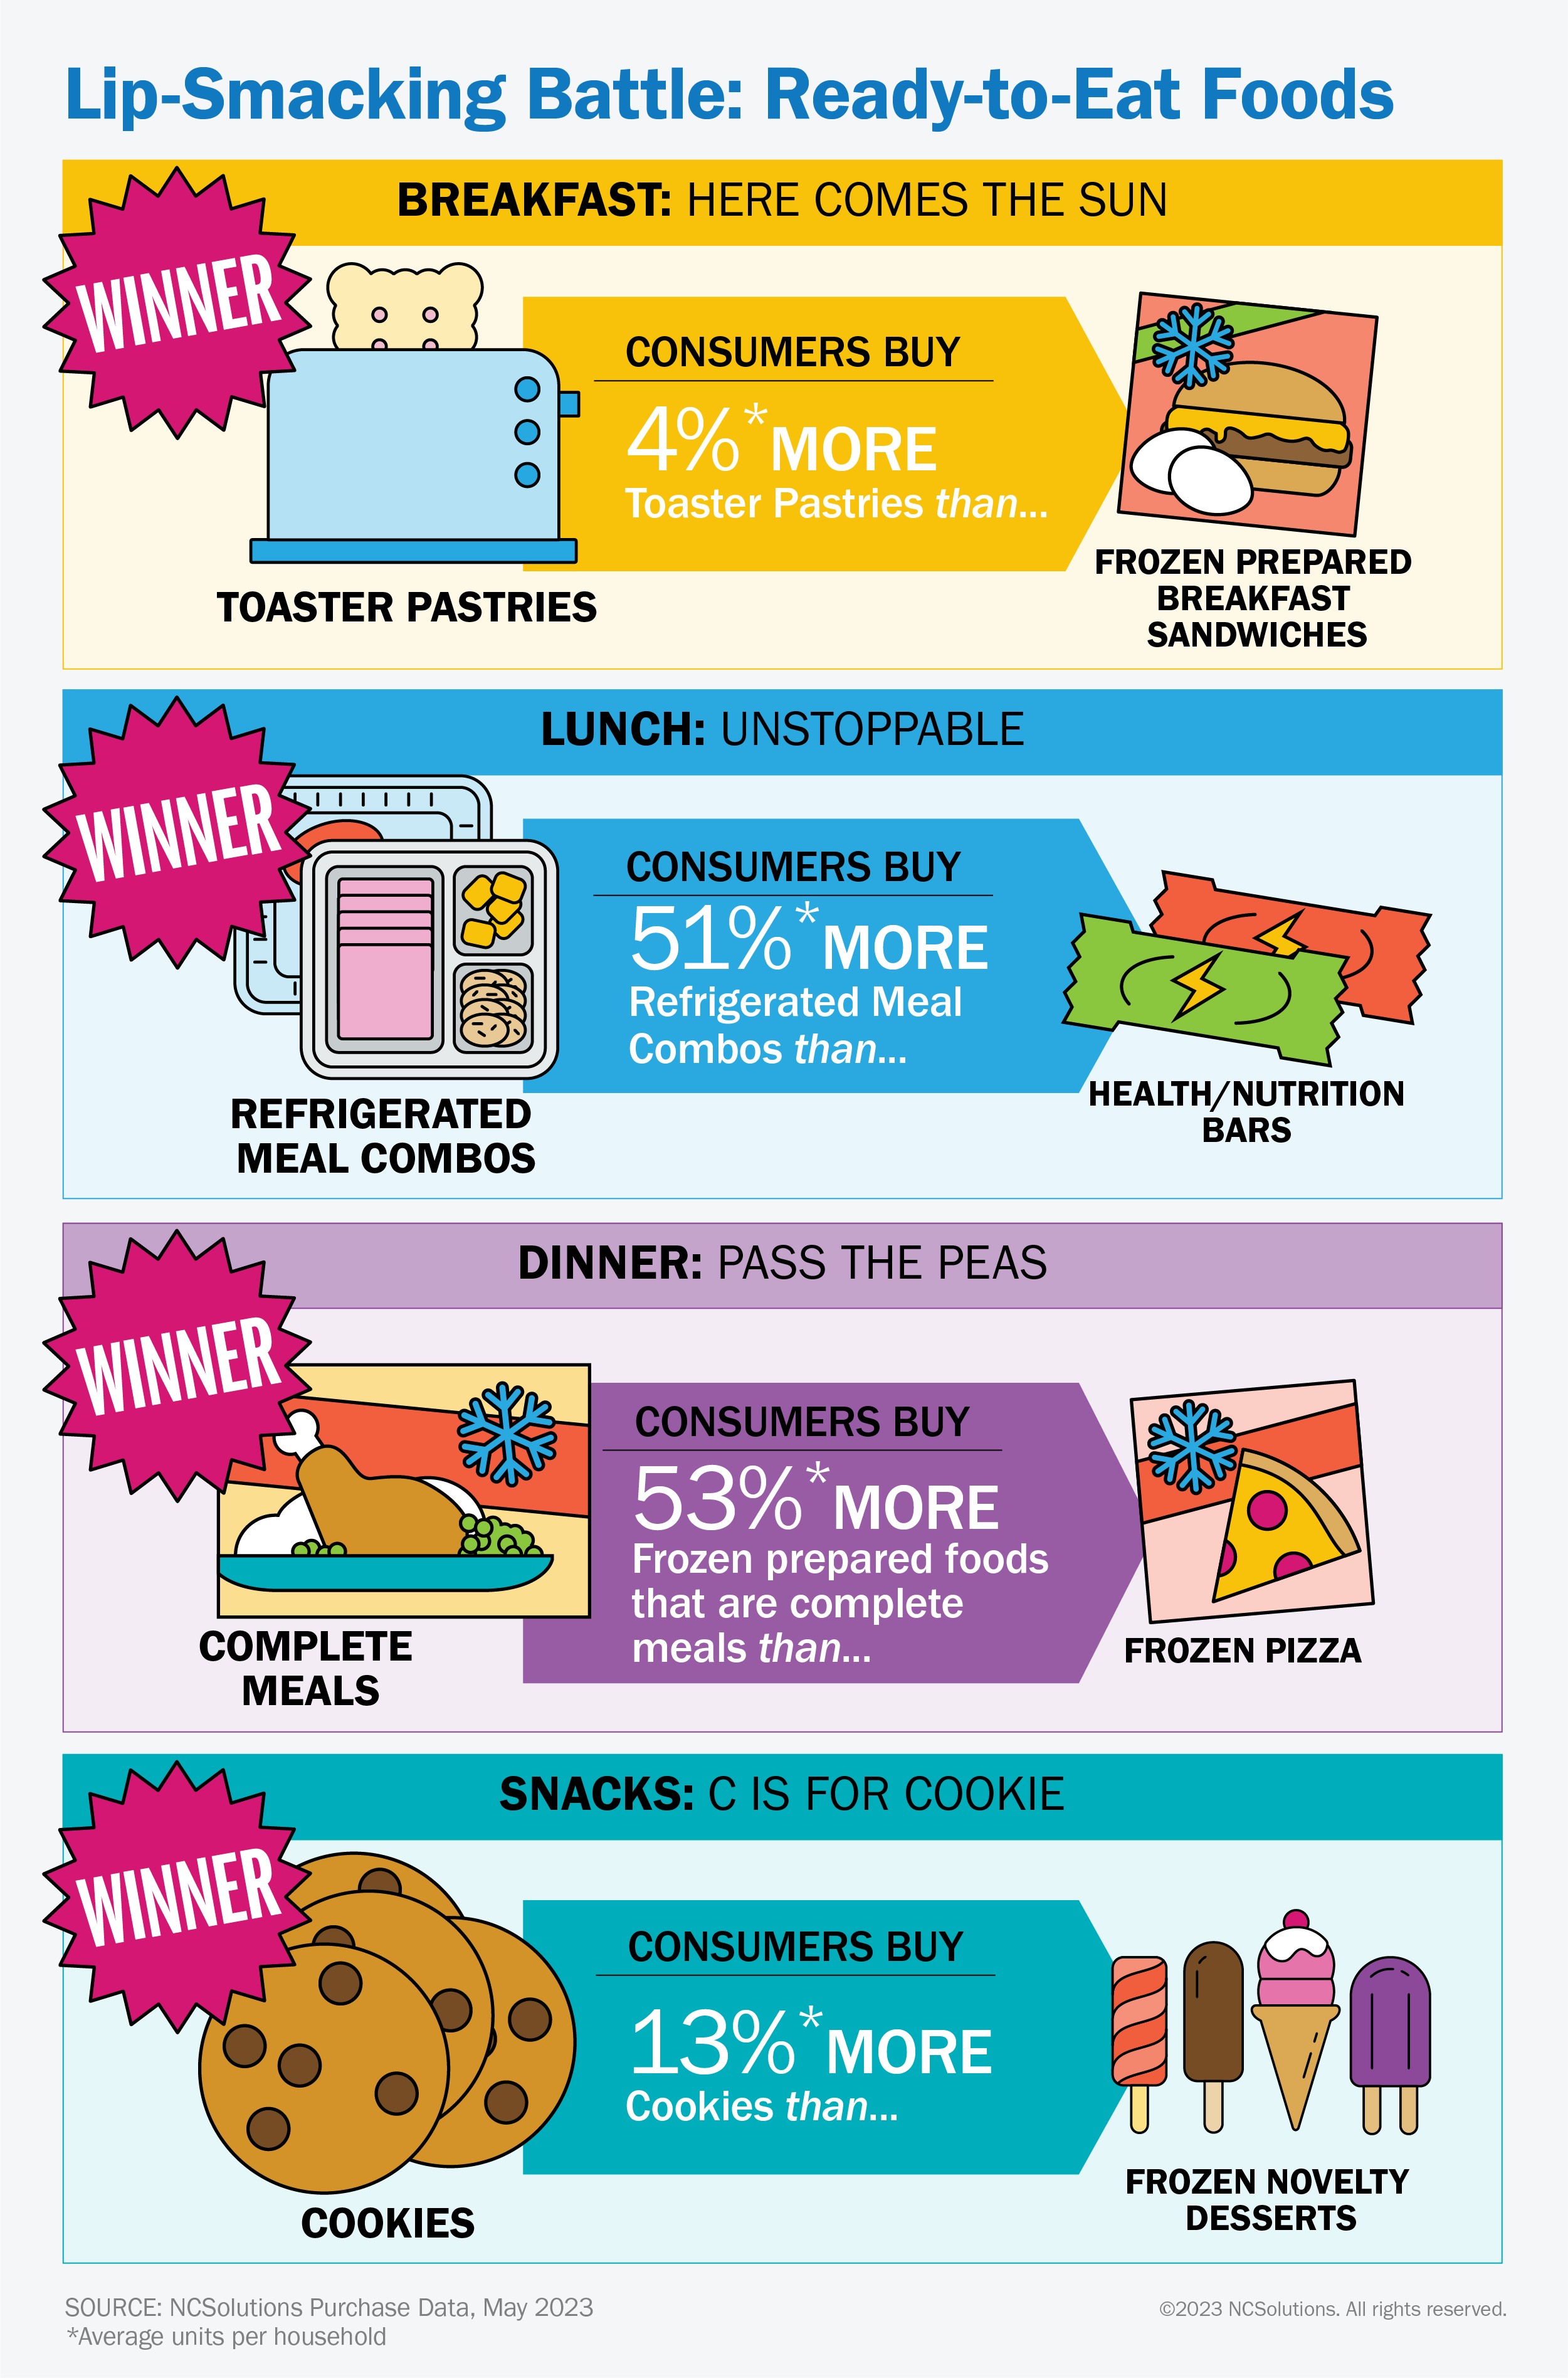 Lip-Smacking Battle: Ready-to-Eat Foods. Breakfast, lunch, dinner and snacks are compared to show which food is more popular for each meal. 